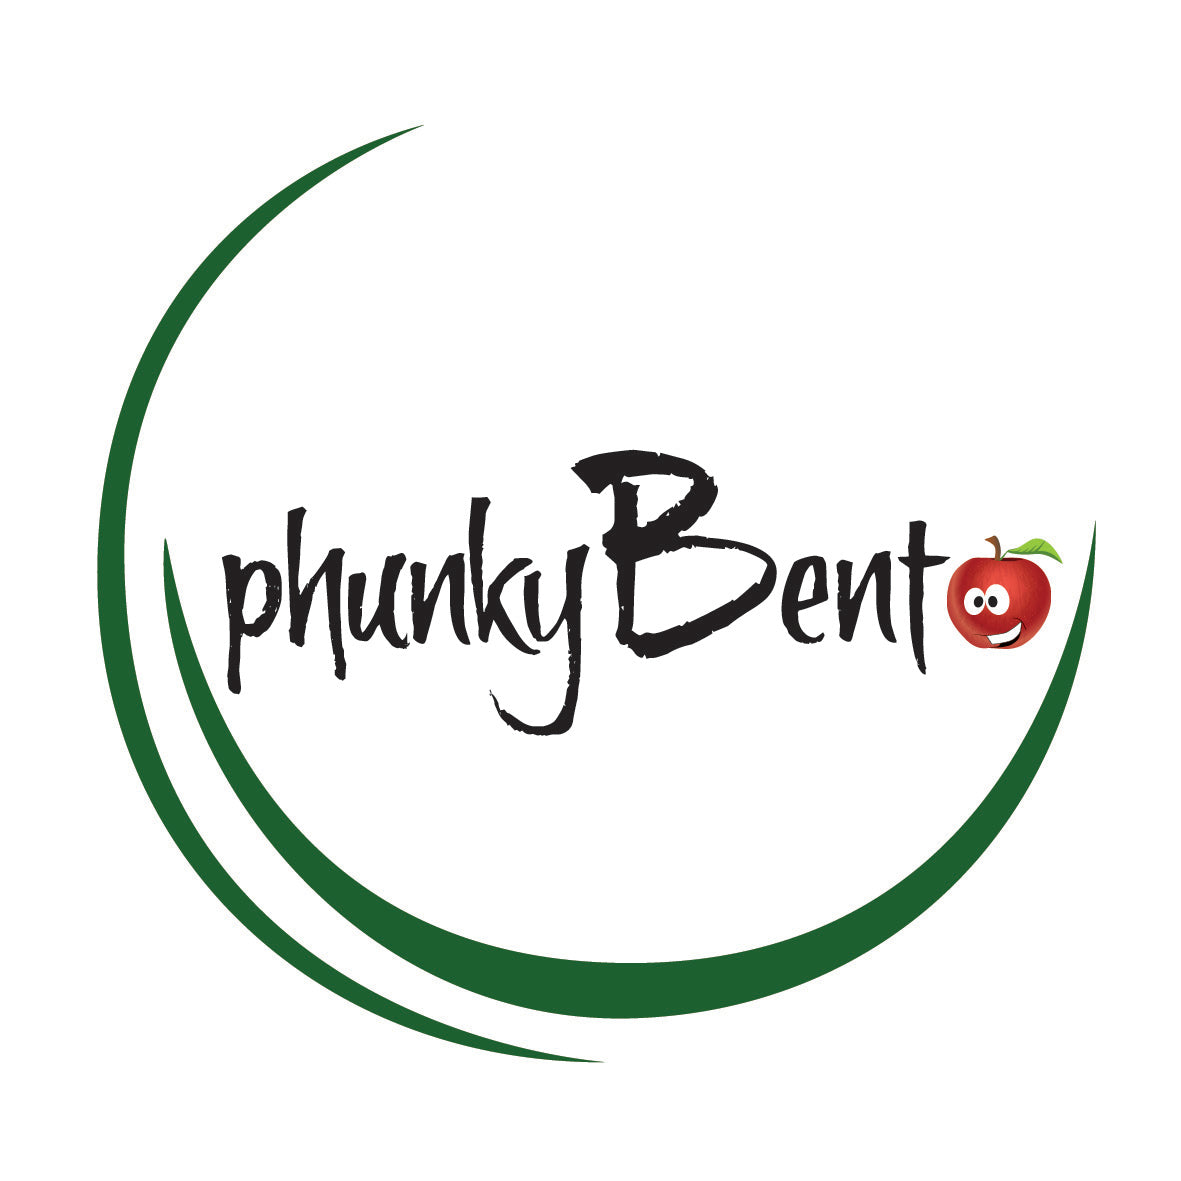 PhunkyBento - Launch Day has arrived!